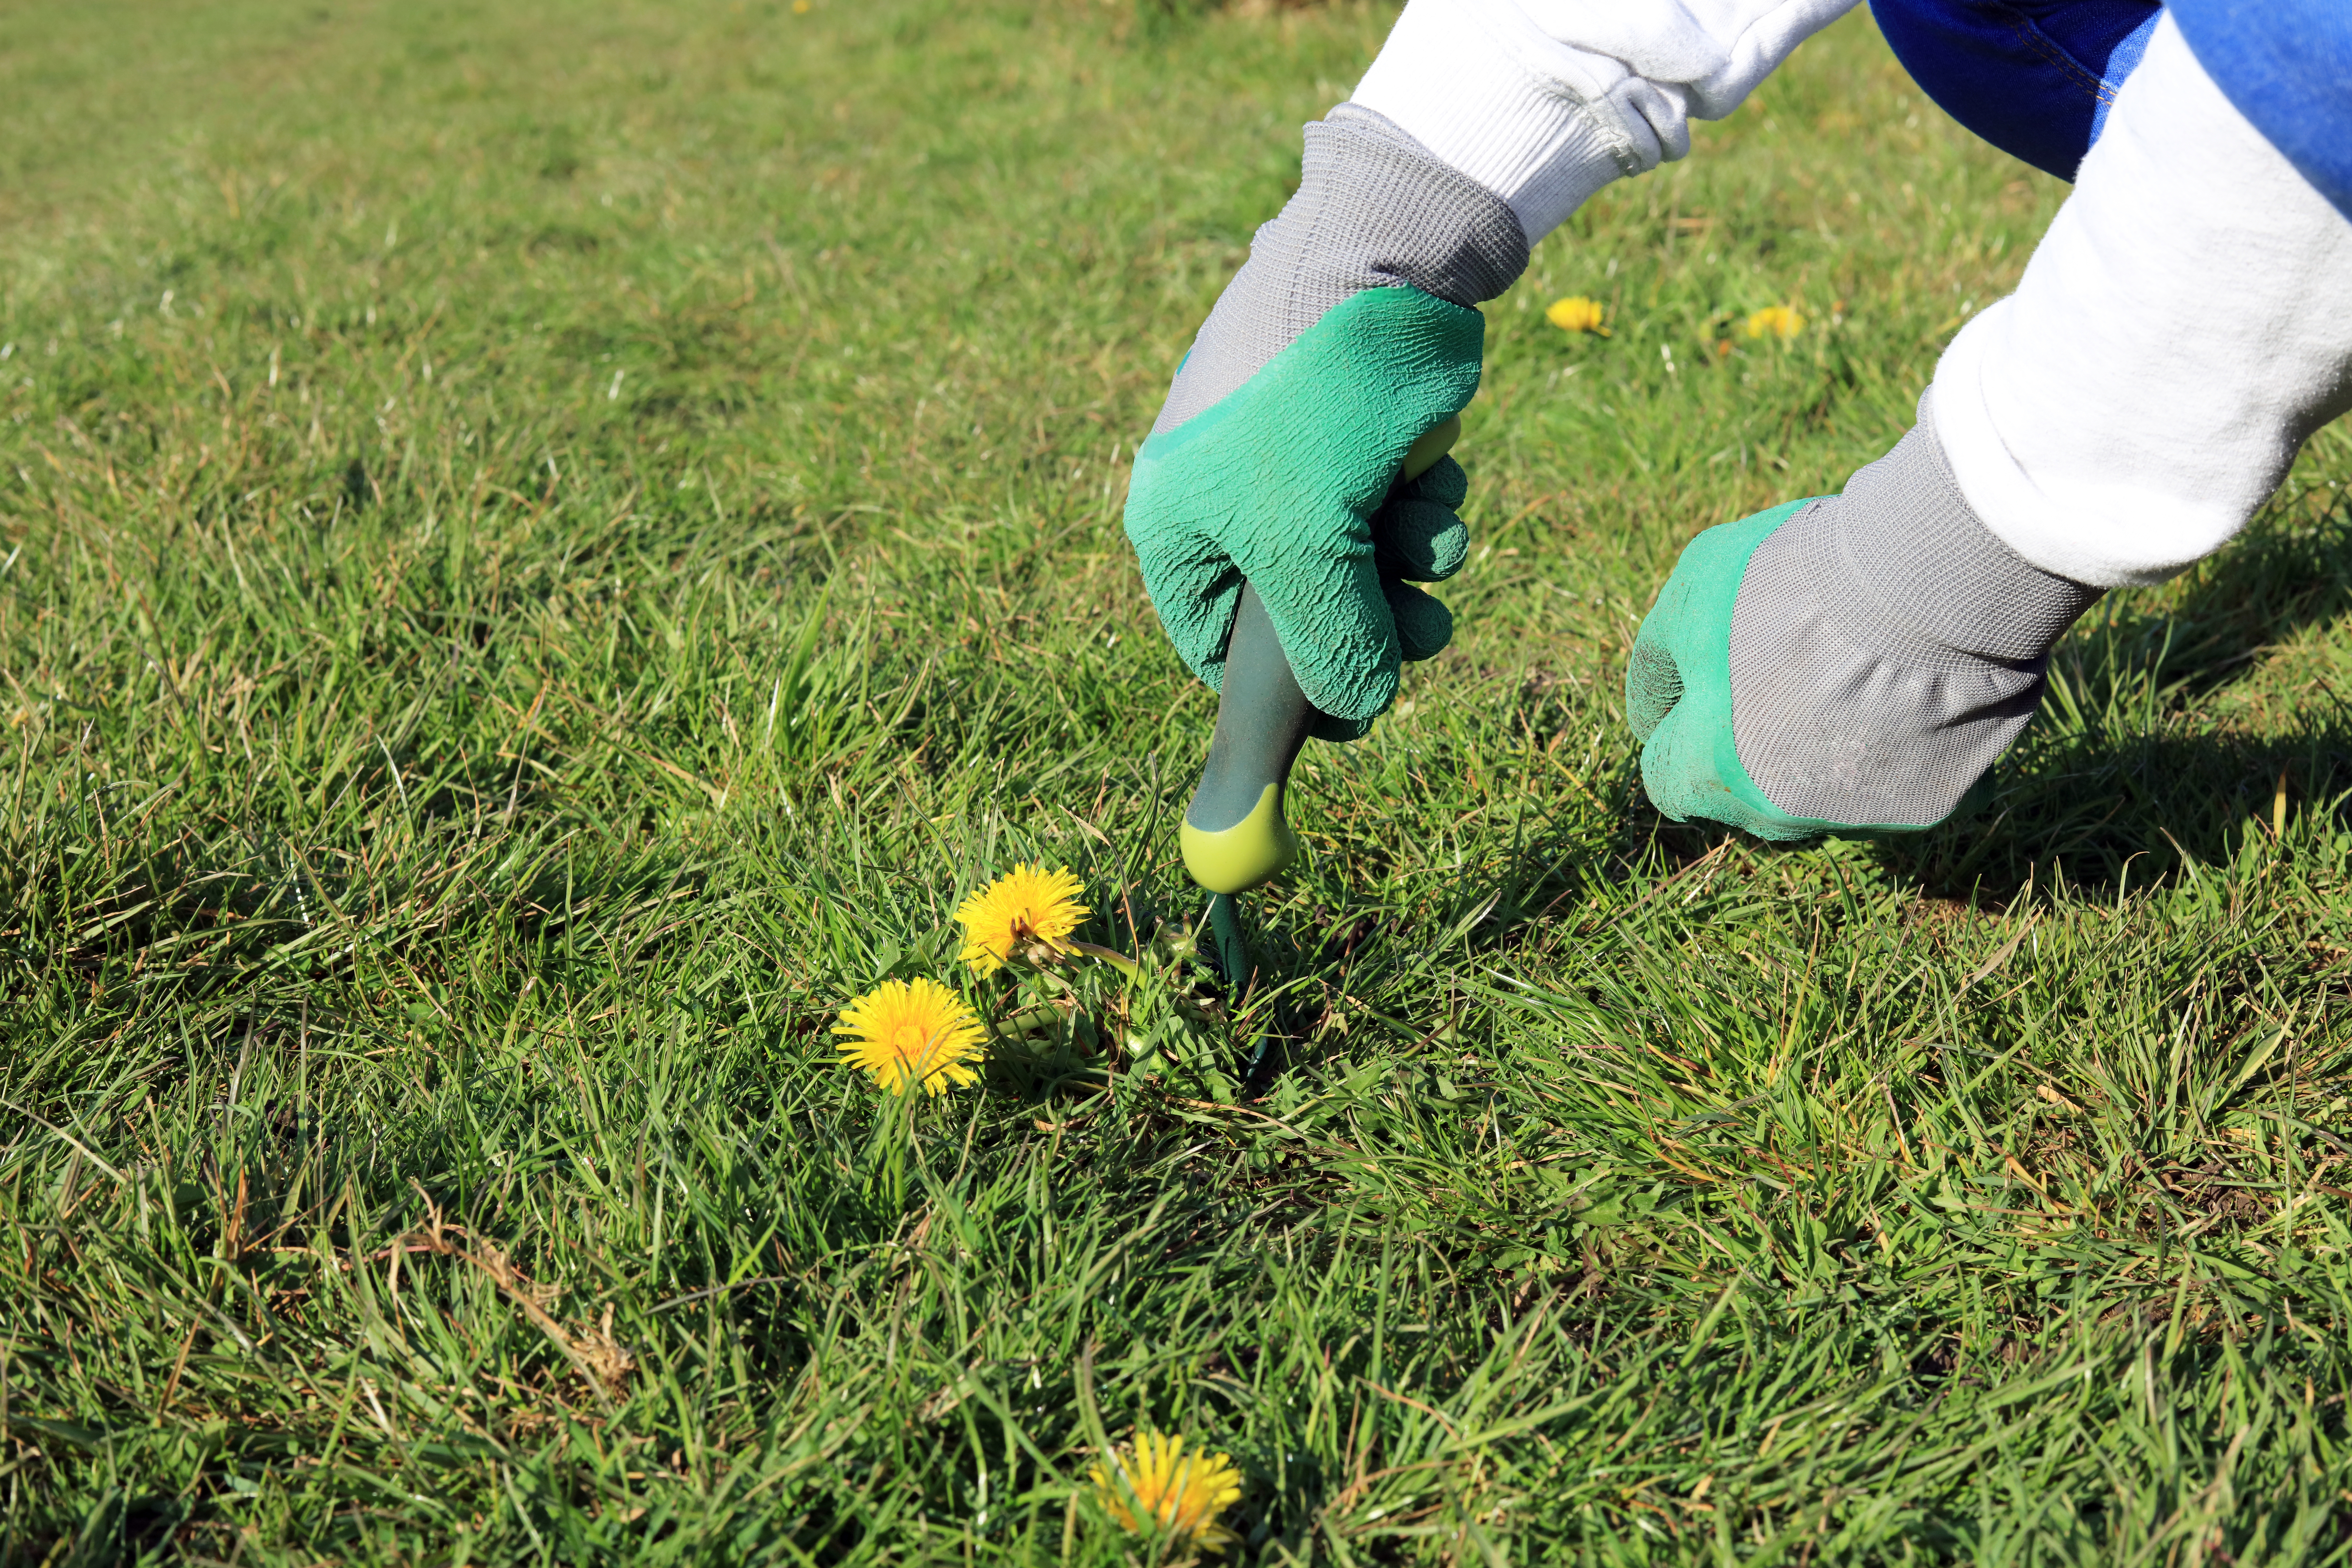 A gardener digging up a dandelion weed in a lawn.